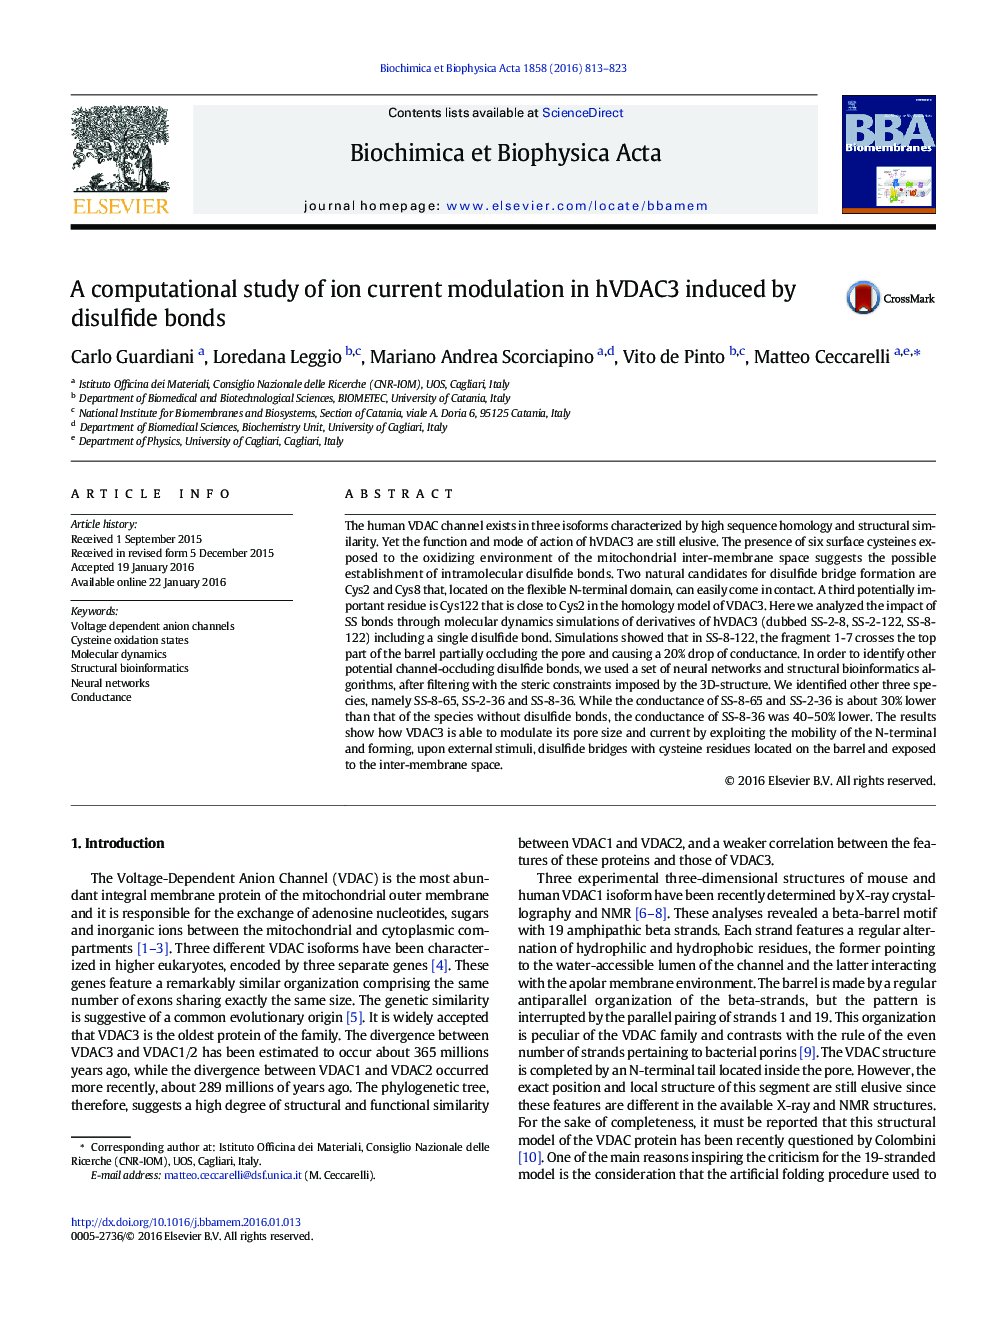 A computational study of ion current modulation in hVDAC3 induced by disulfide bonds